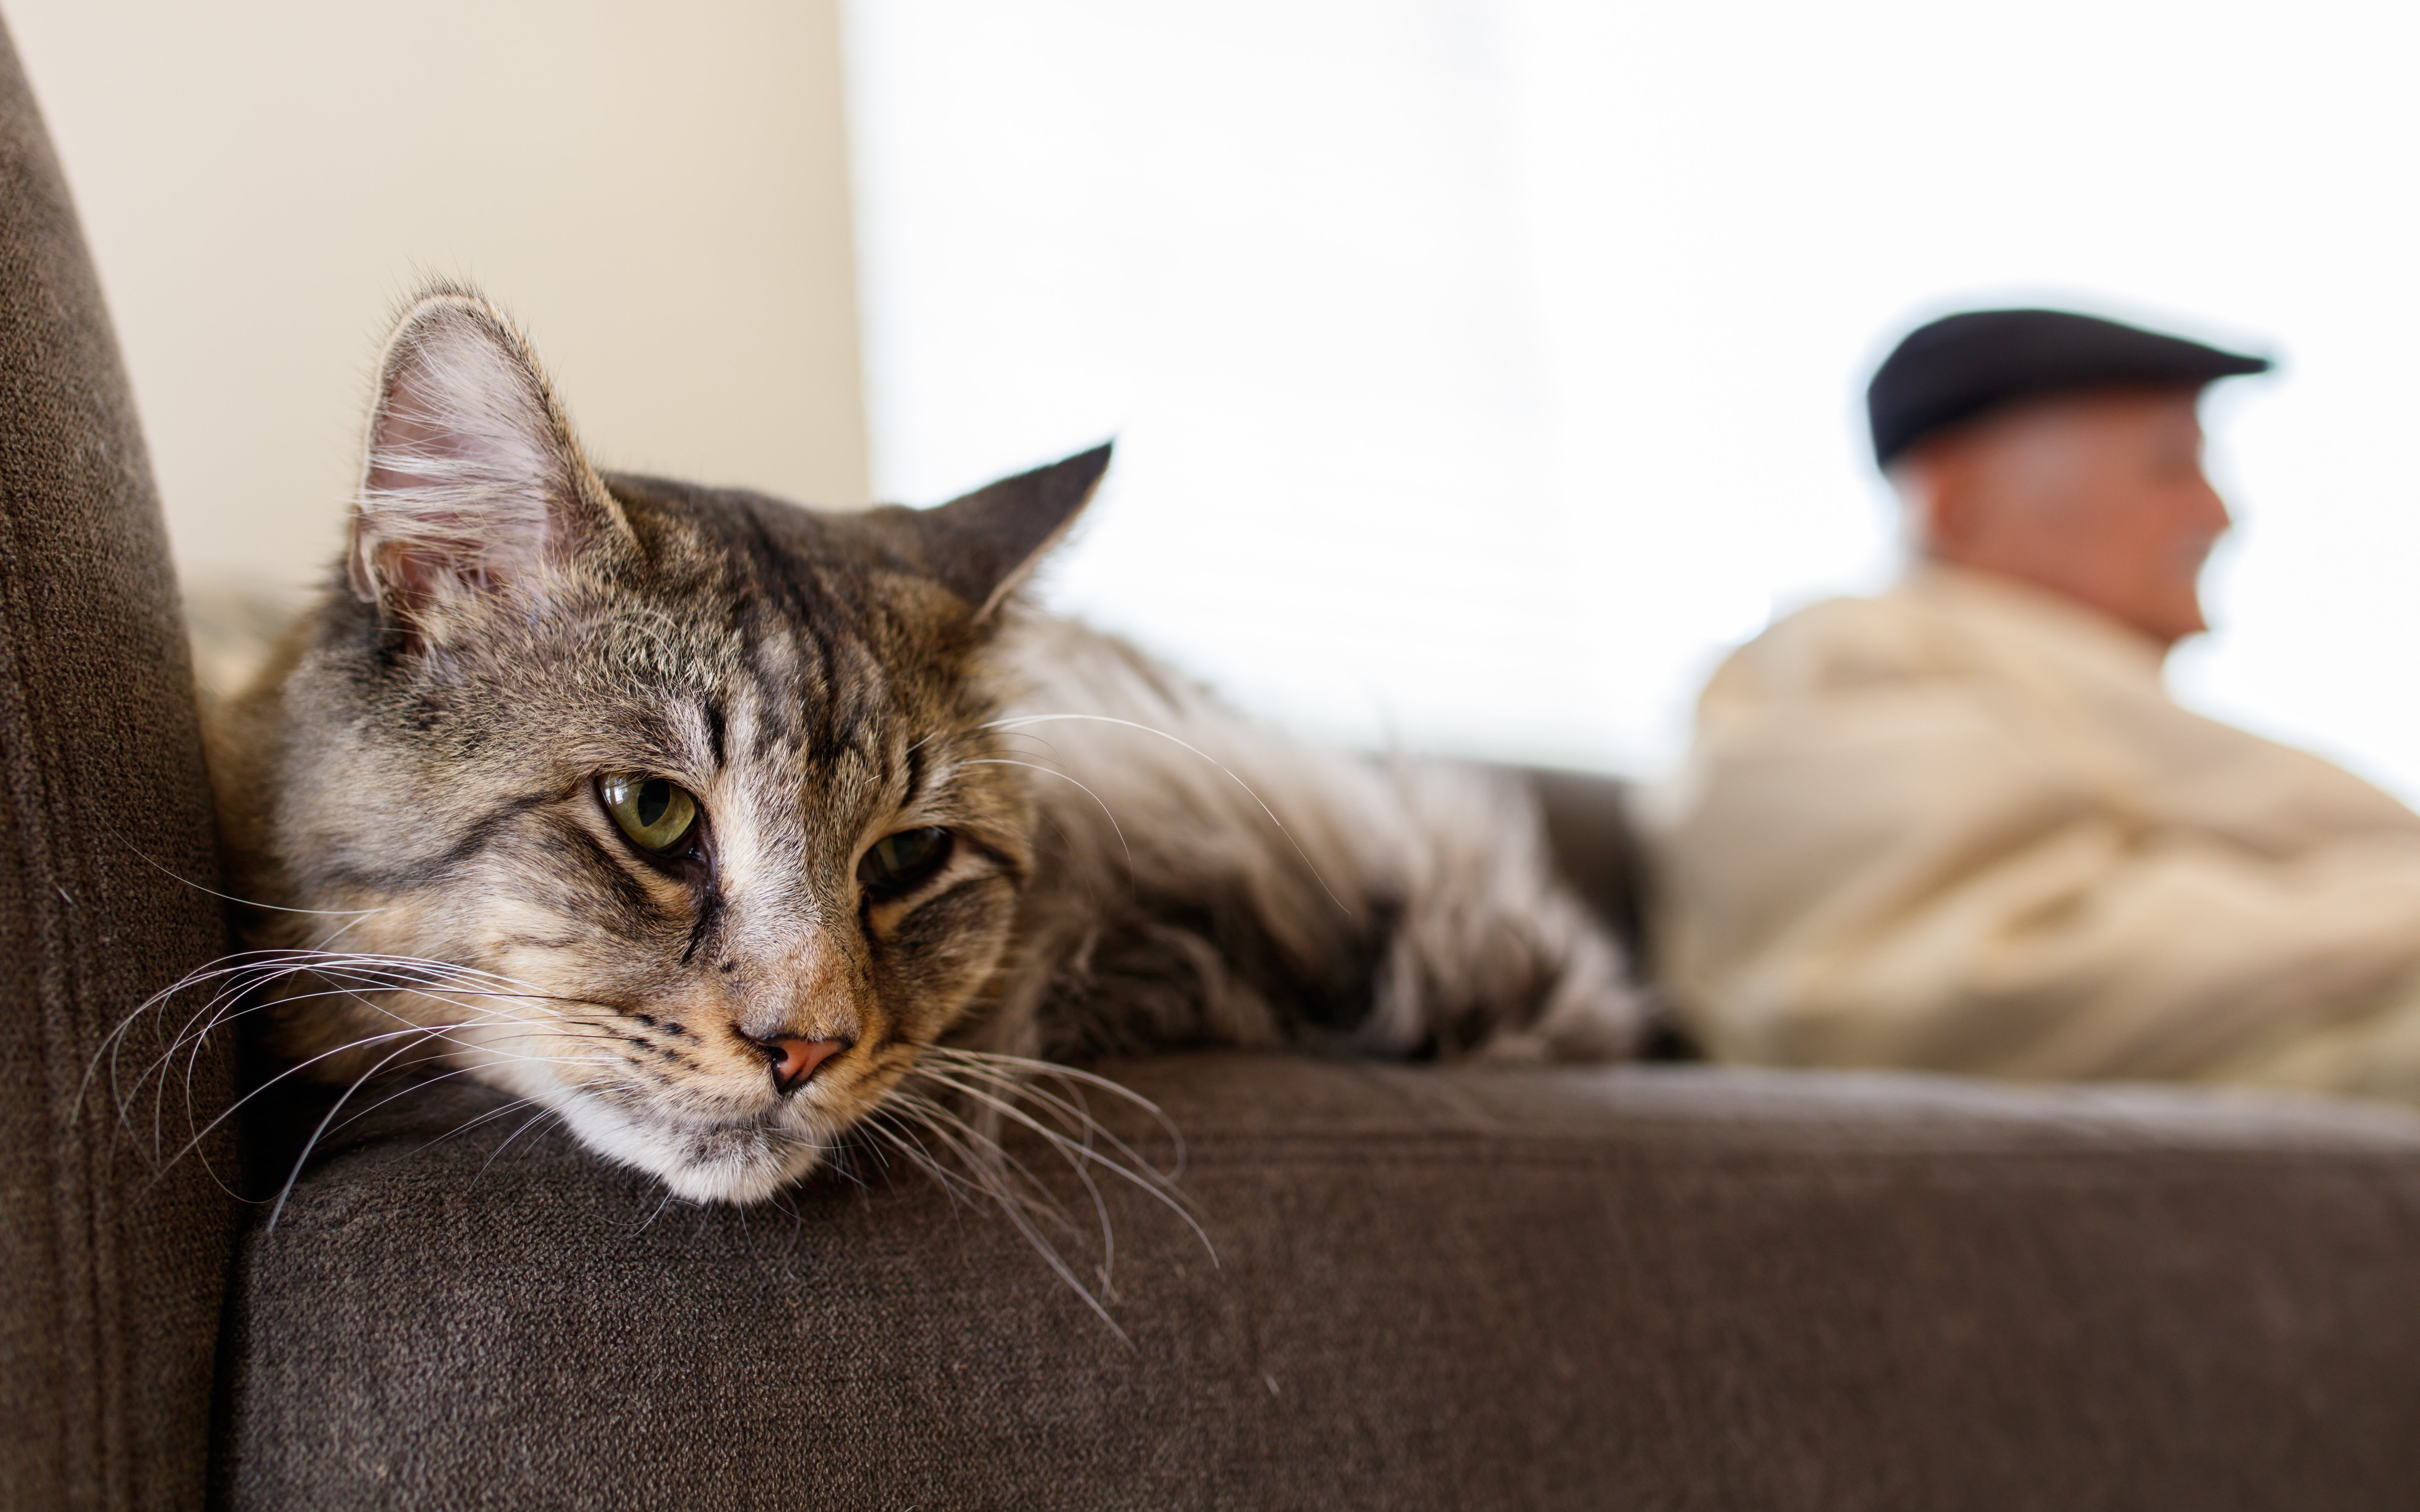 What To Do When You Can't Take Care of Your Pet Anymore